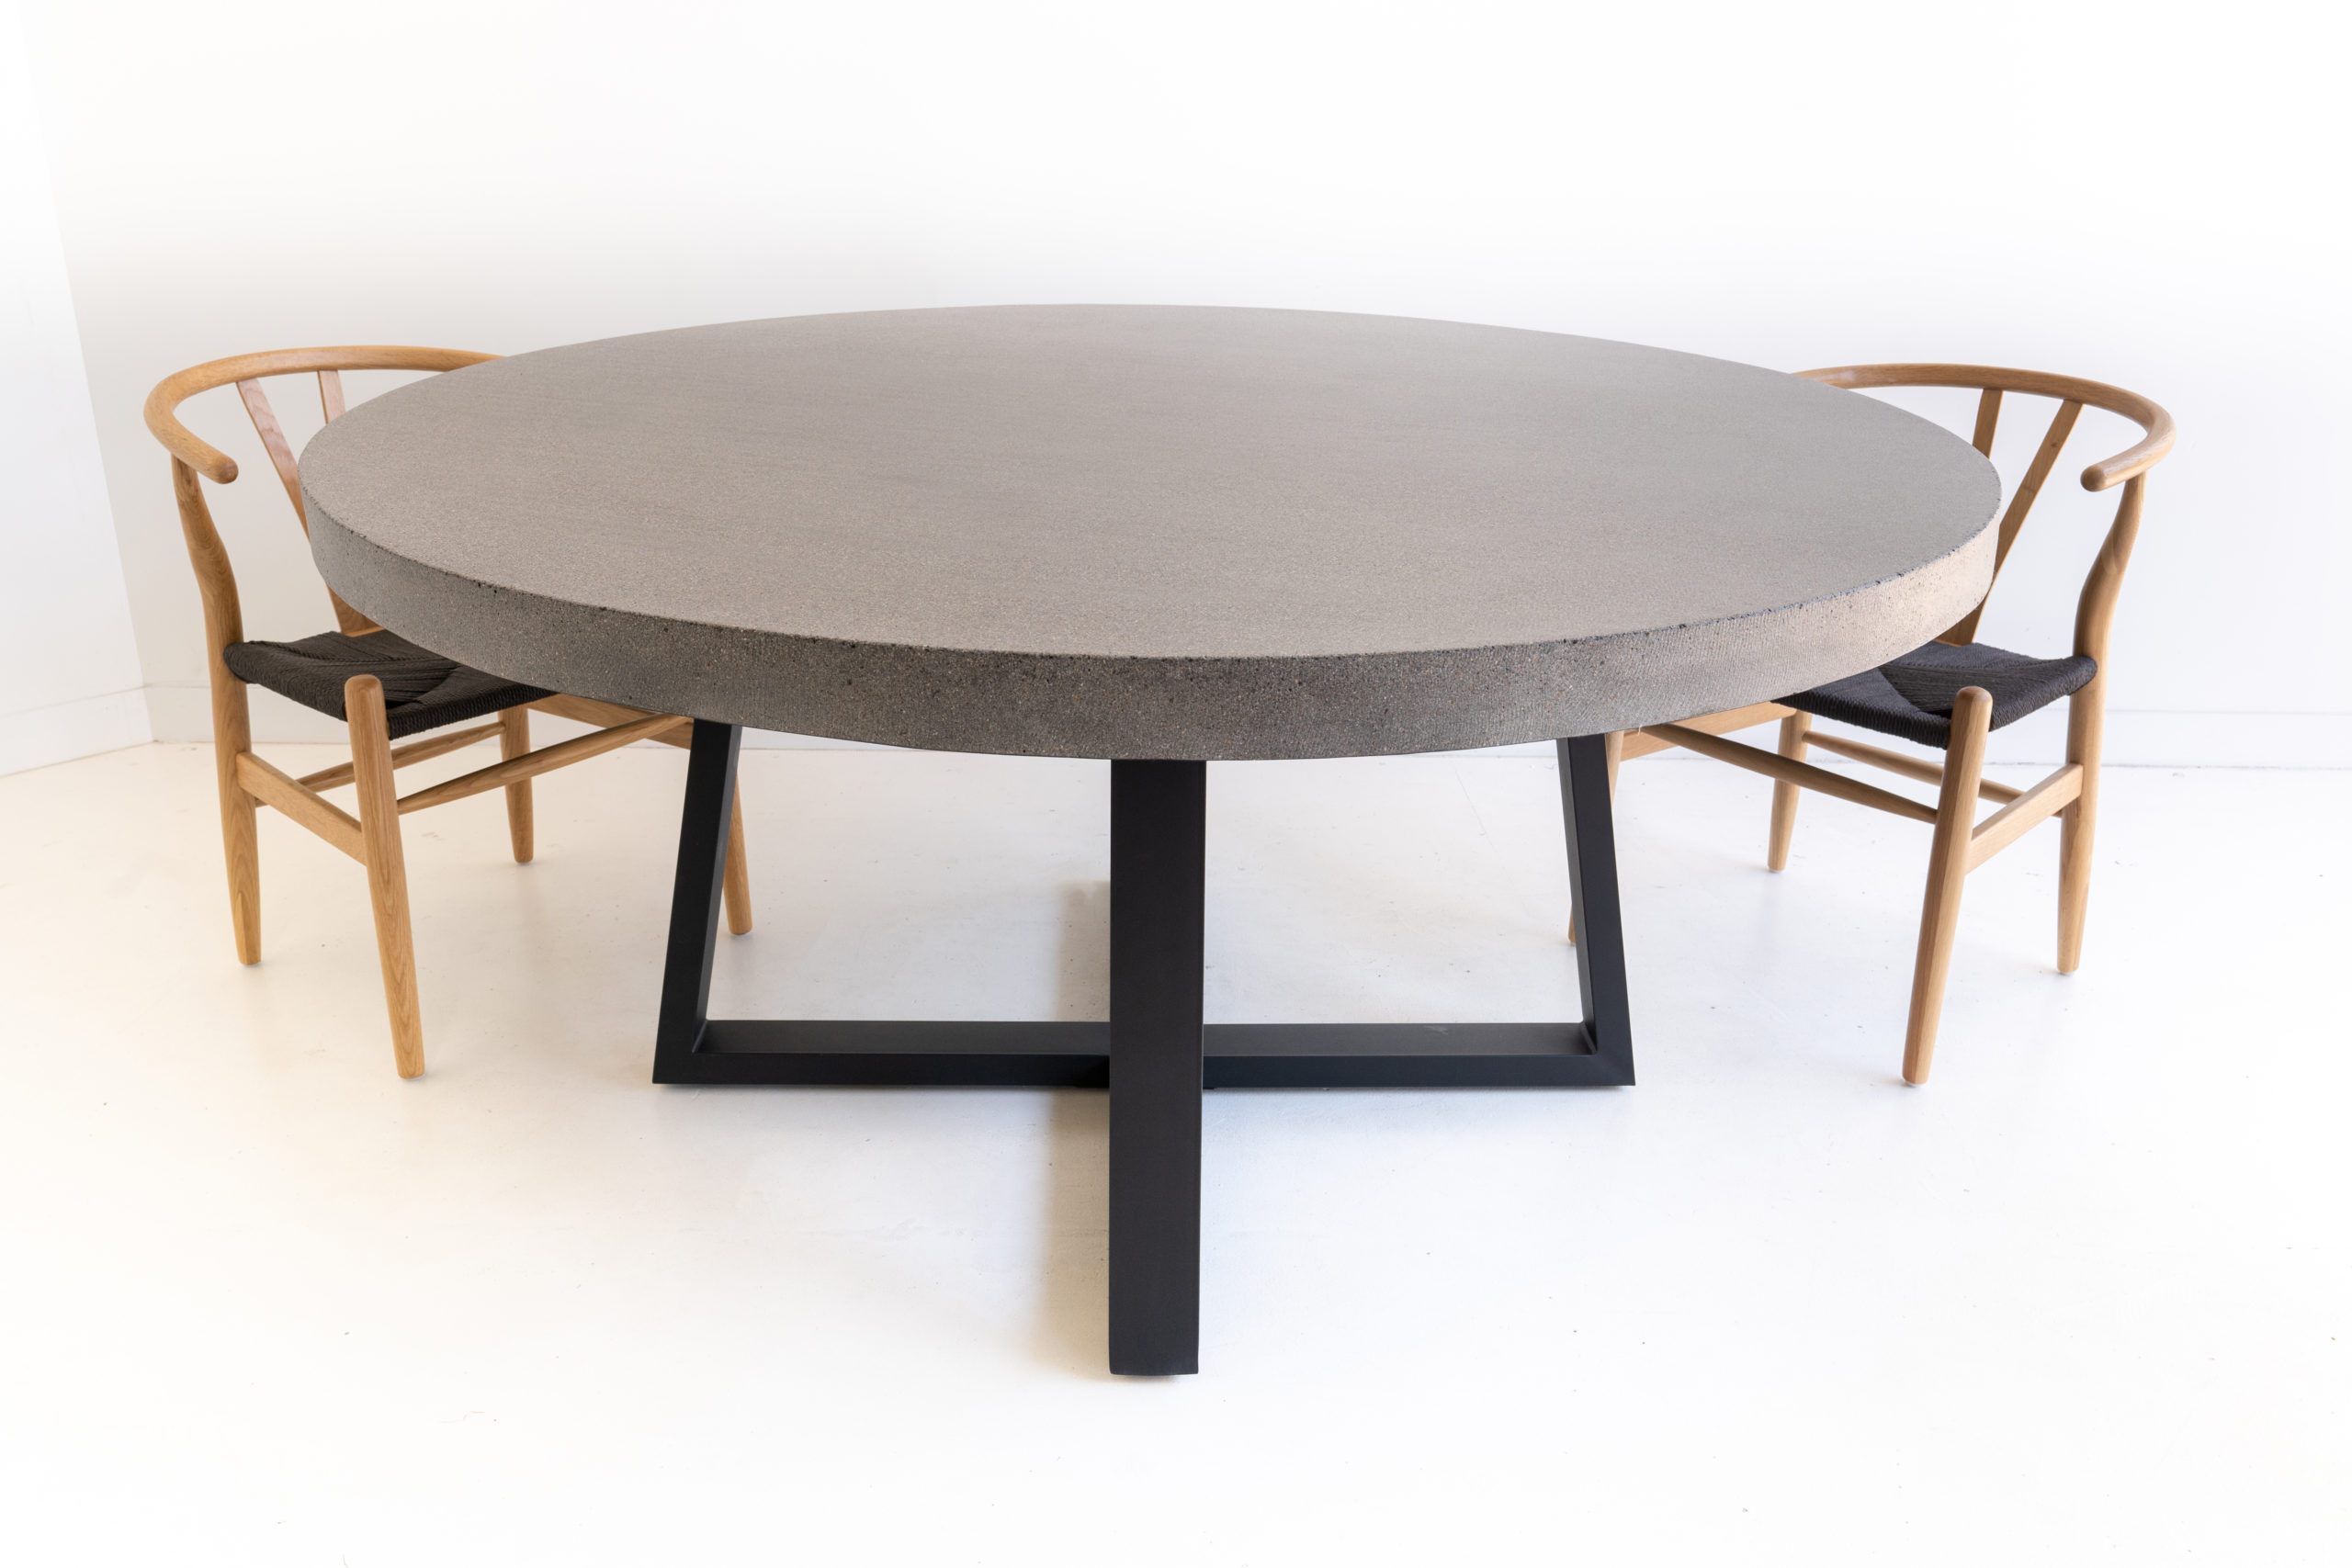 1.6m Alta ElkStone Round Dining Table - Speckled Grey With Black Powder Coated Iron Legs